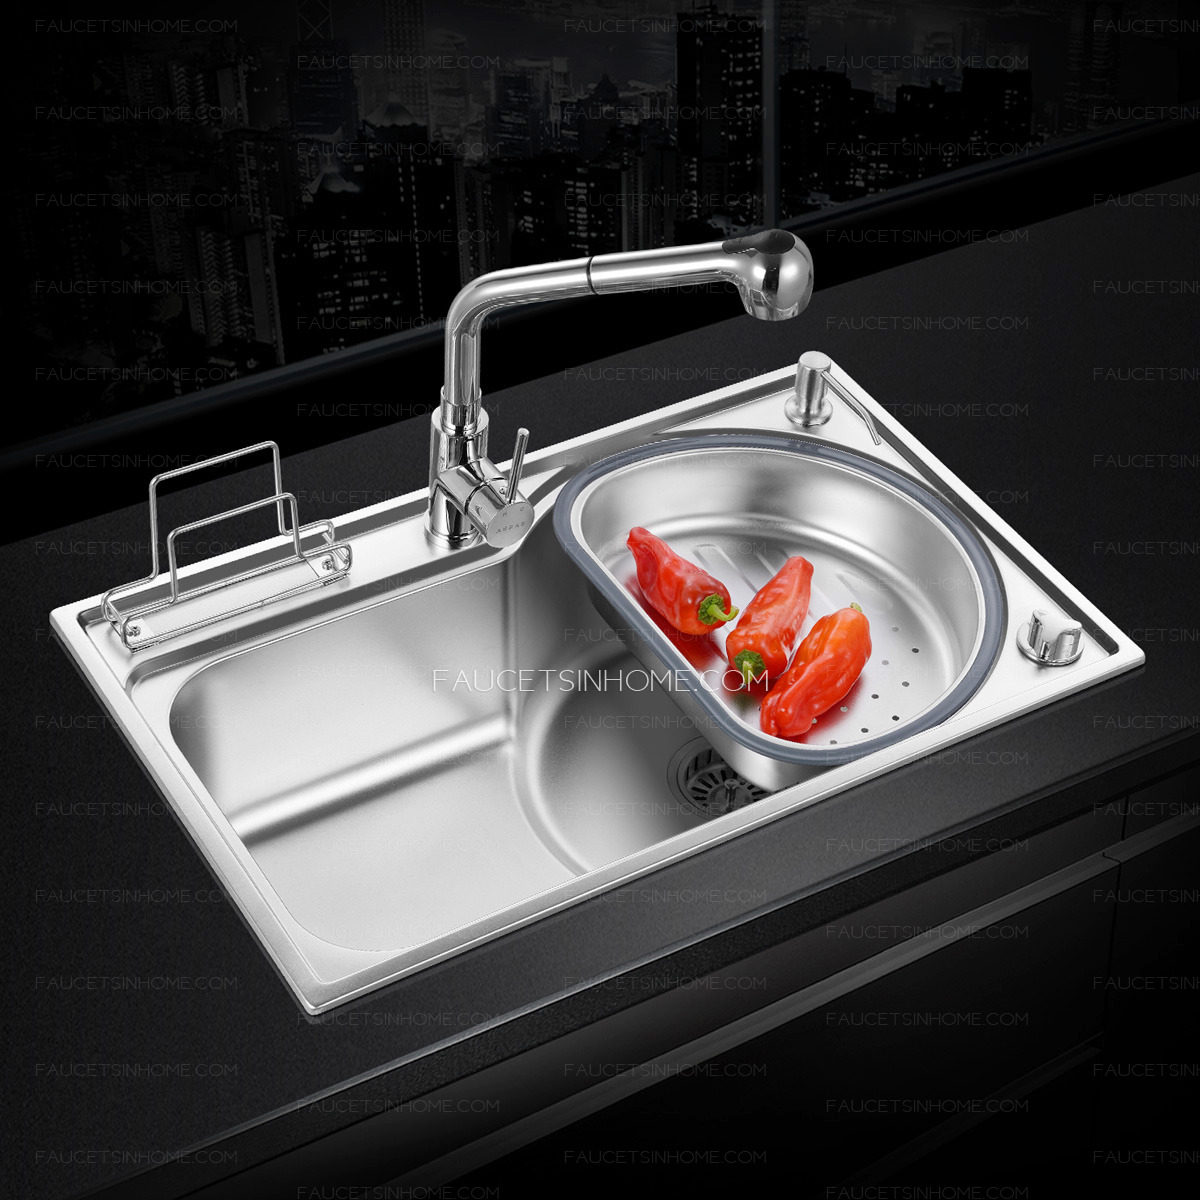 Kitchen Sinks Nickel Brushed Stainless Steel Single Bowl With Faucet